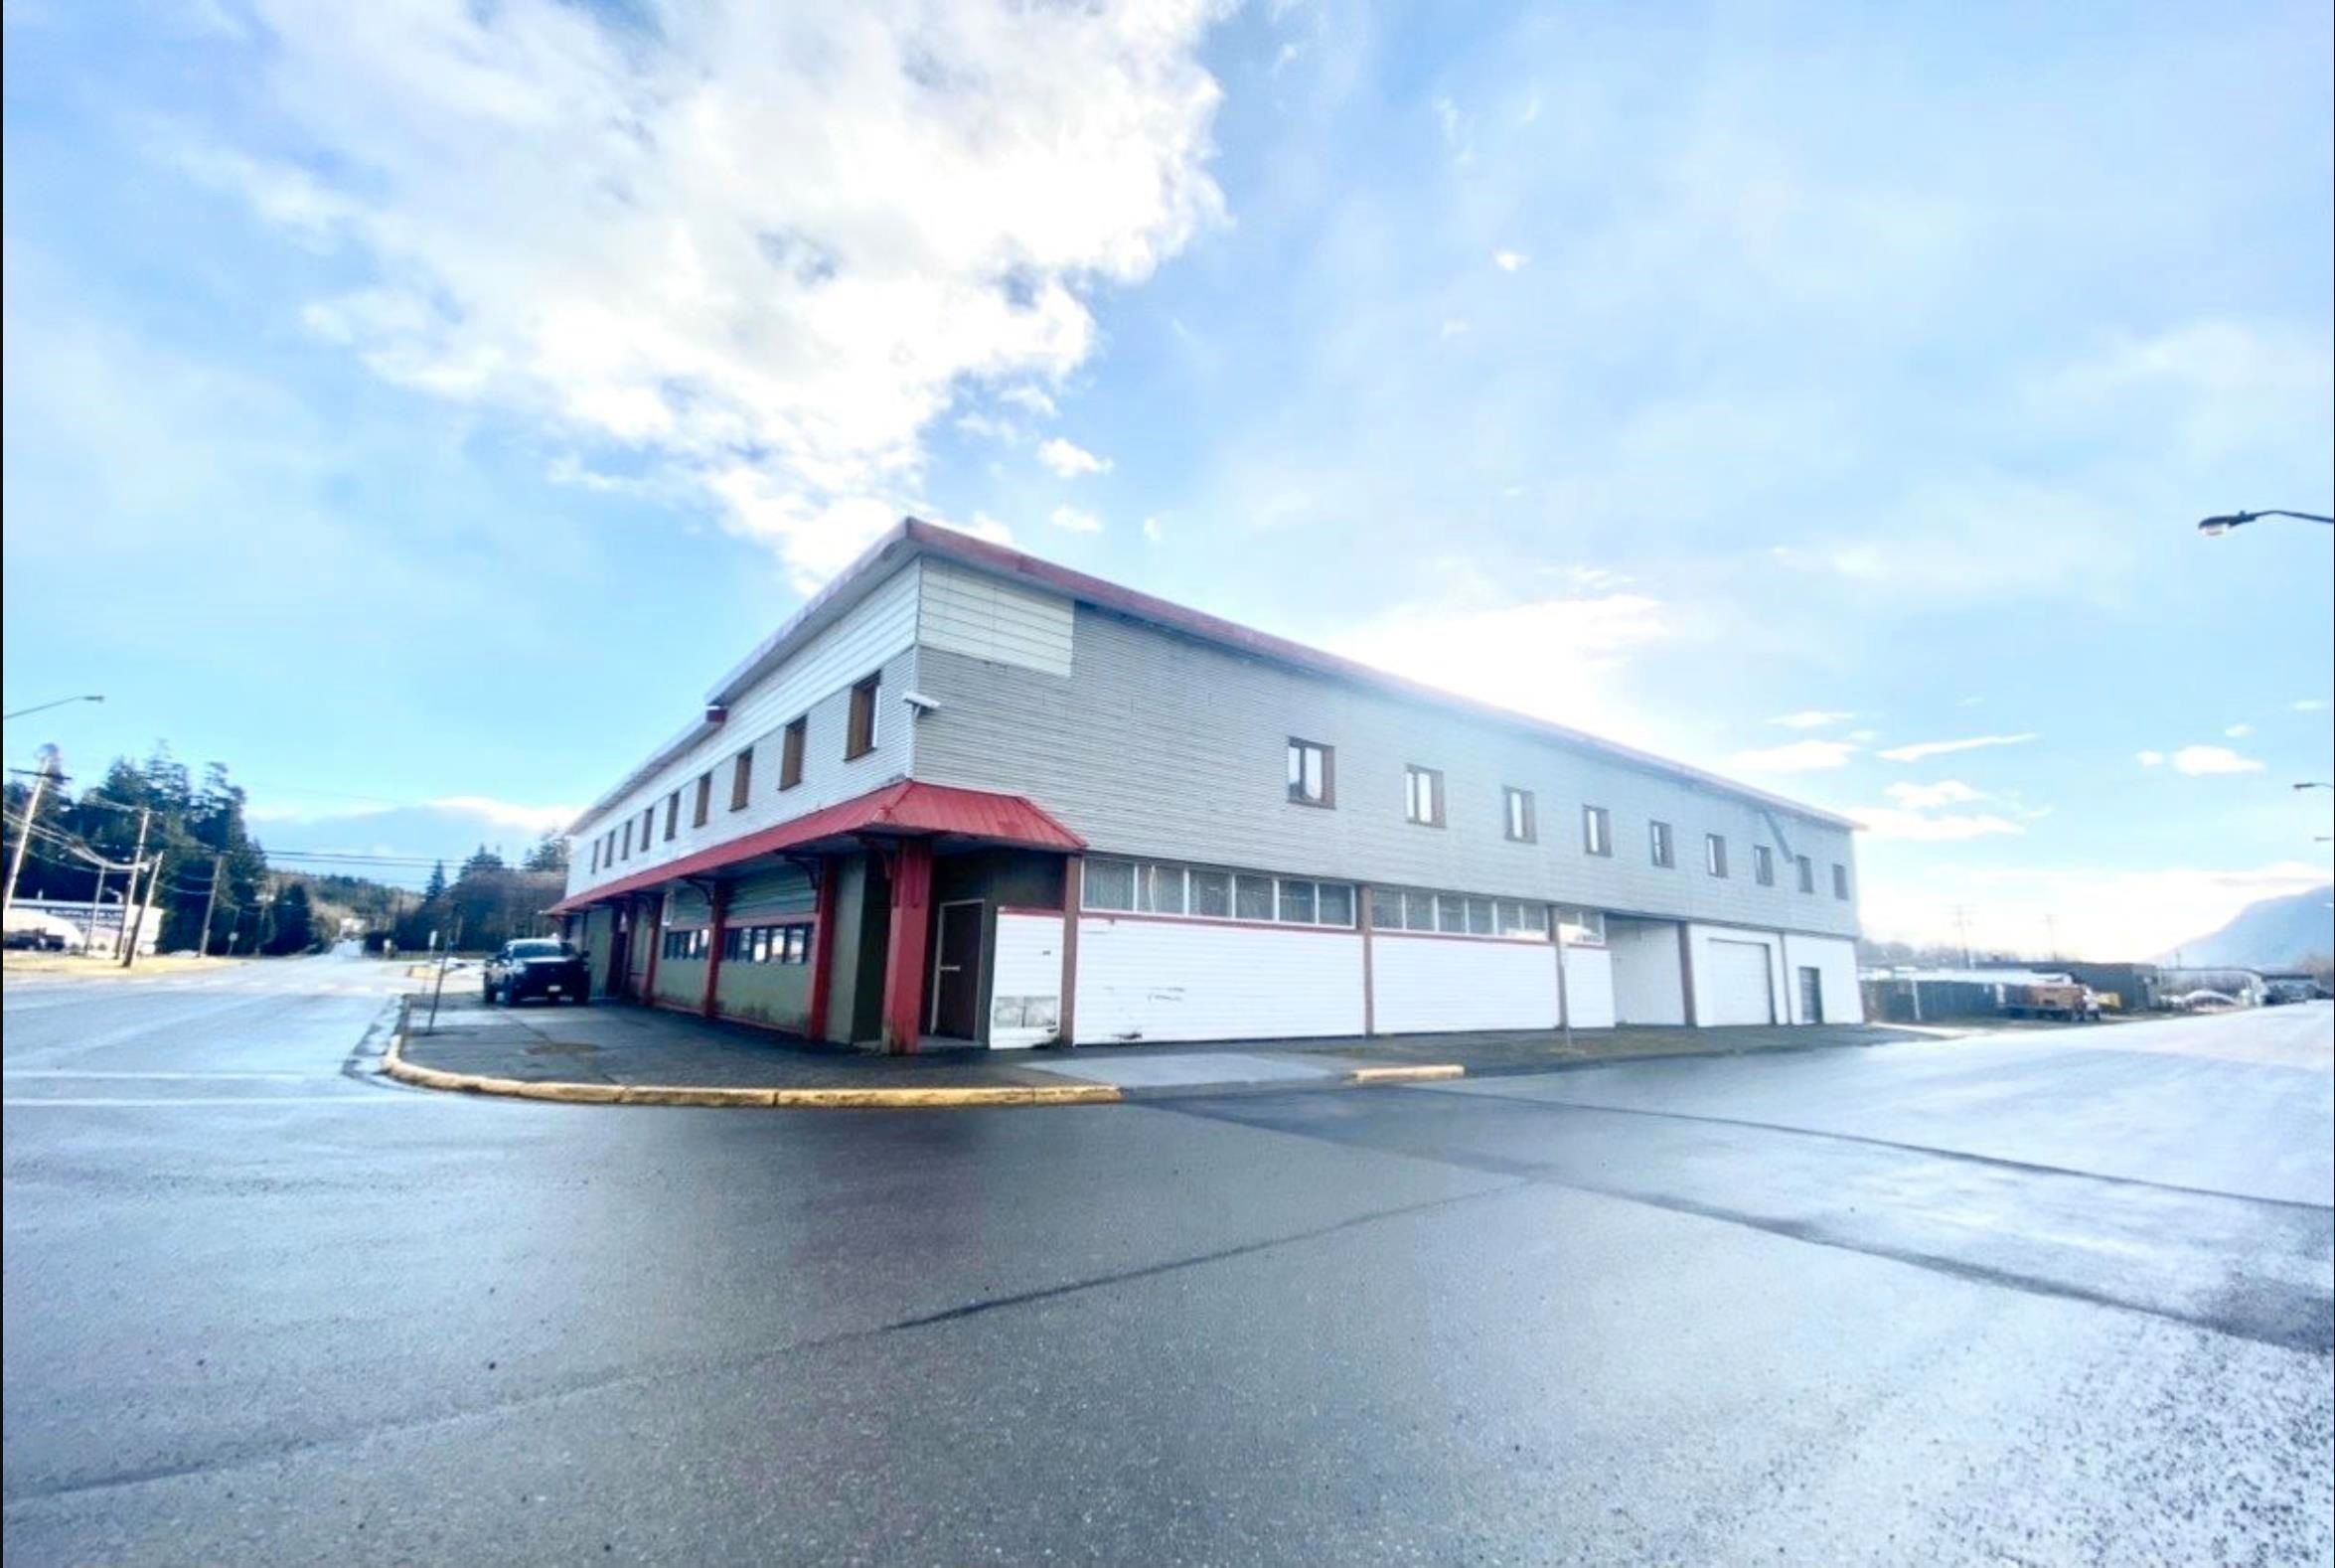 Main Photo: 506 ENTERPRISE Avenue in Kitimat: Kitimat Rural Business with Property for sale : MLS®# C8050225